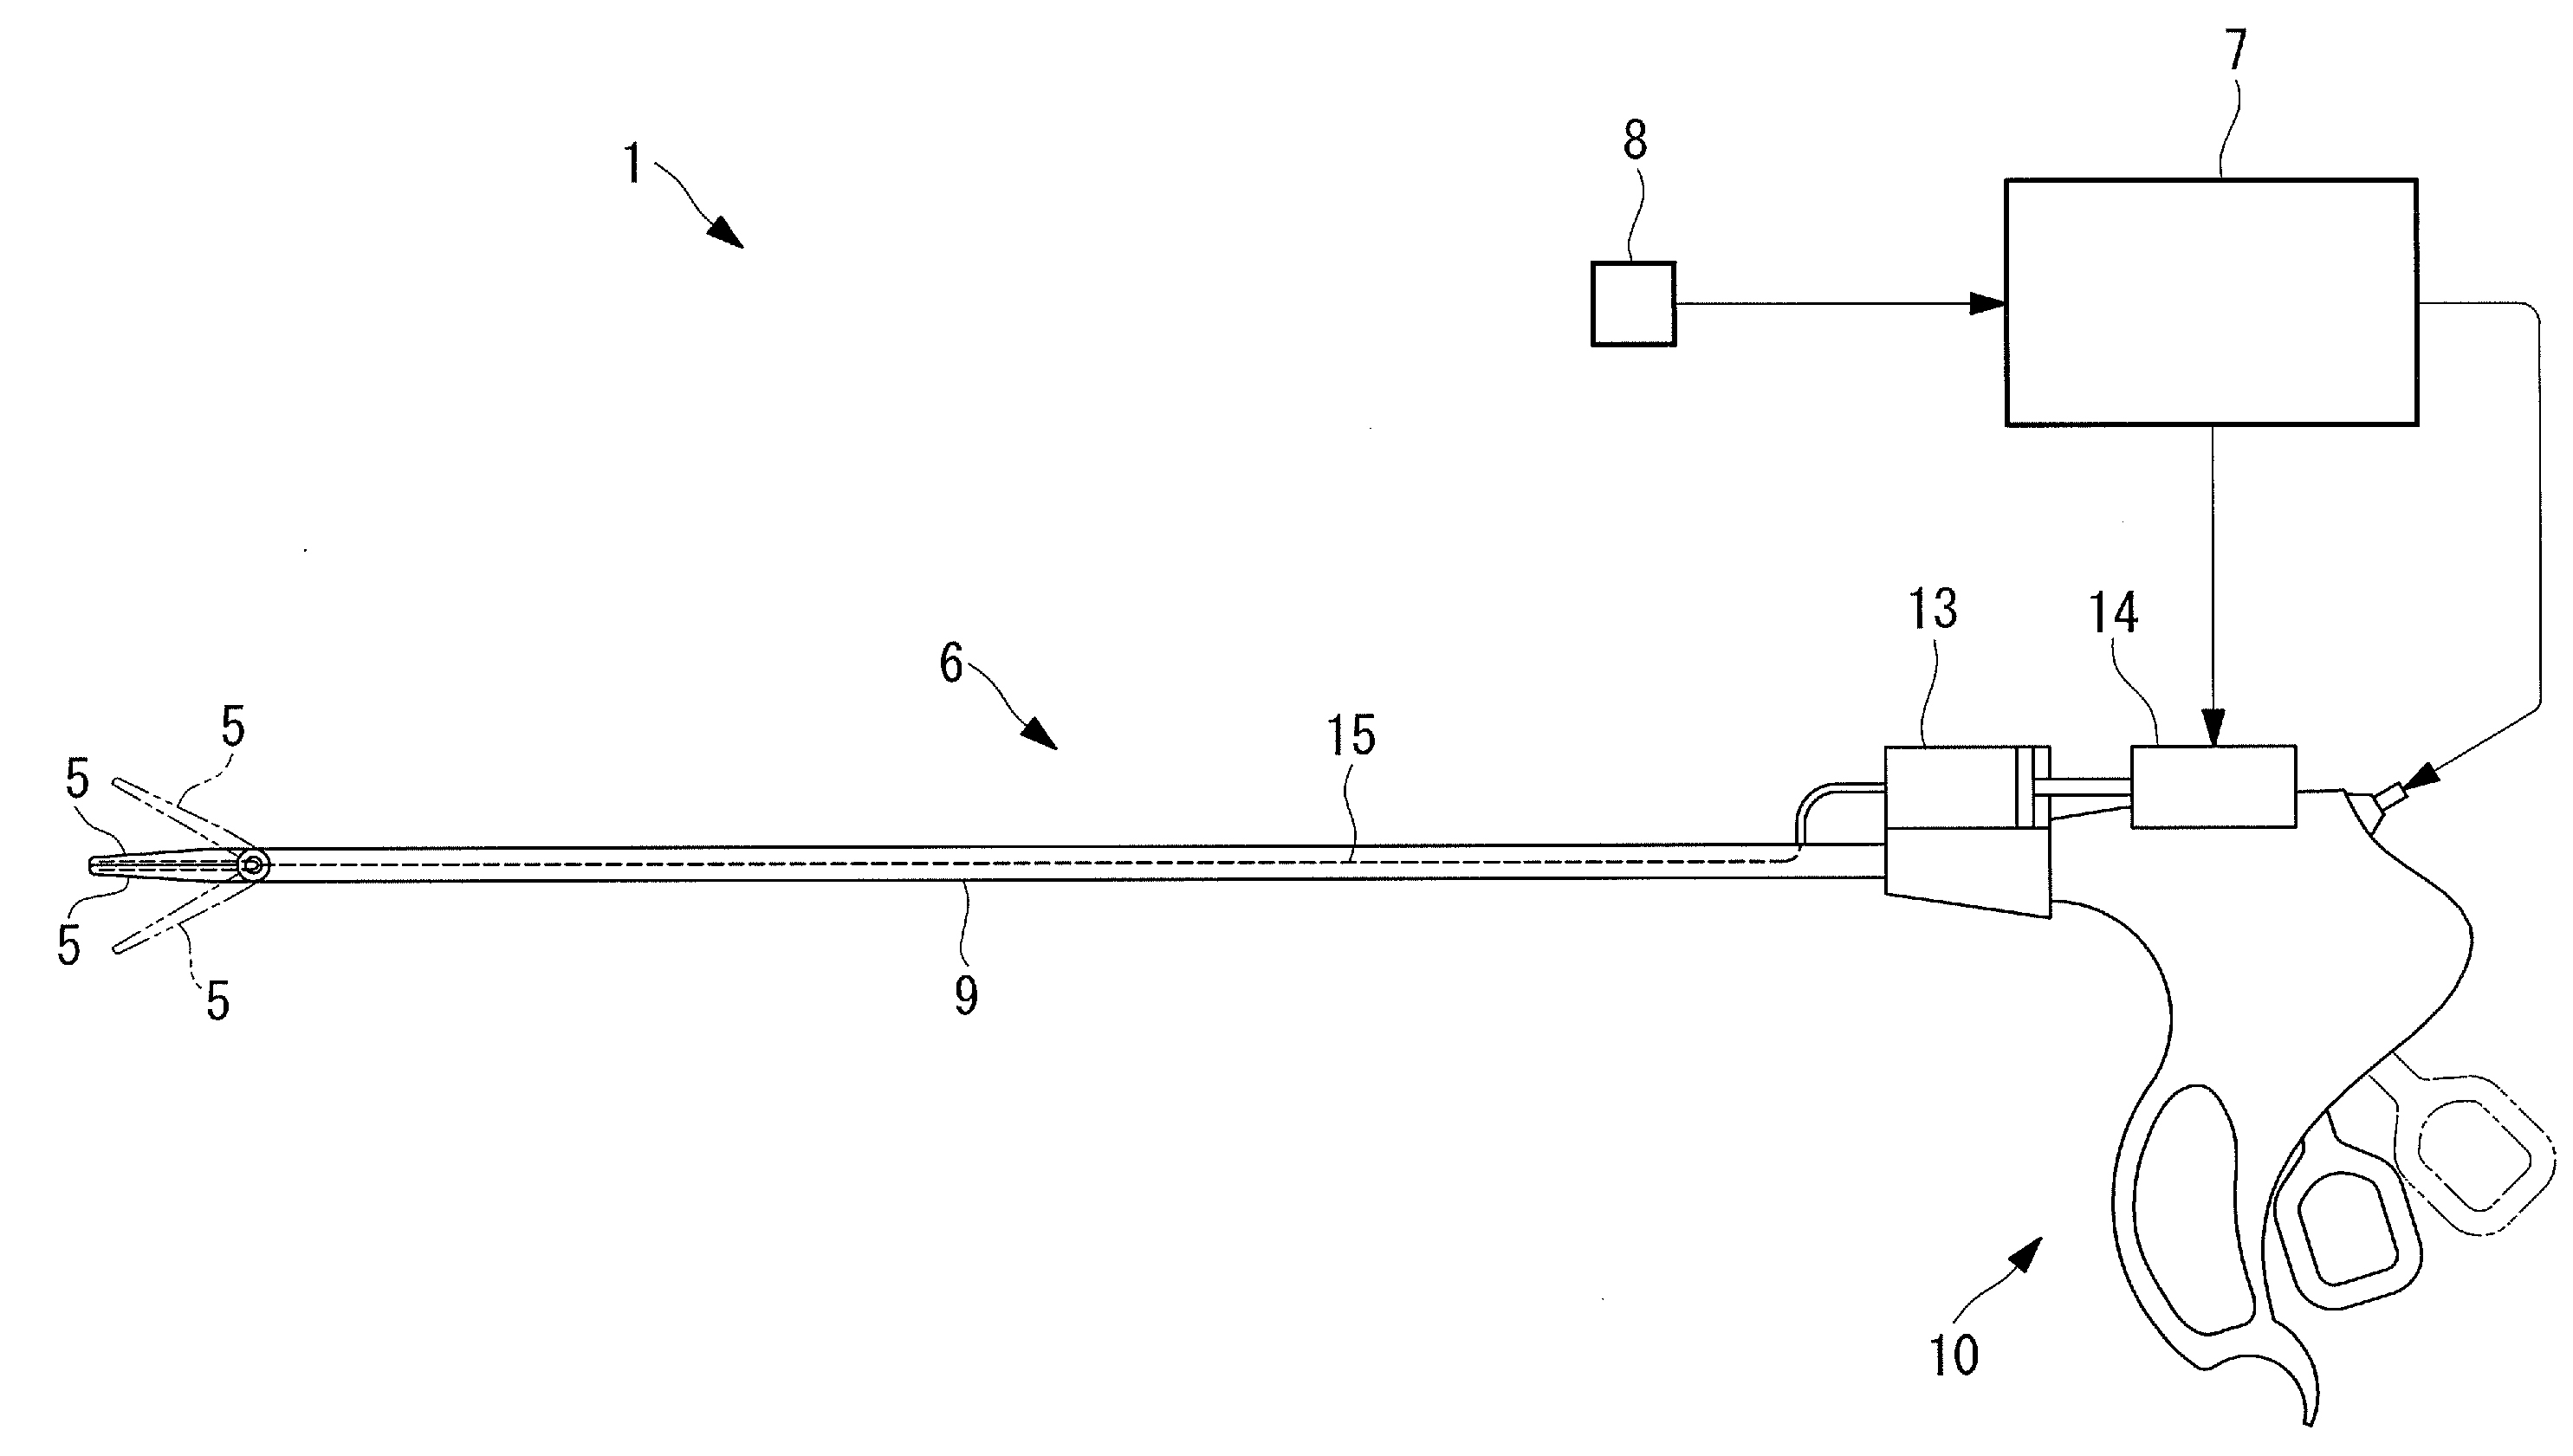 Biological-tissue joining apparatus